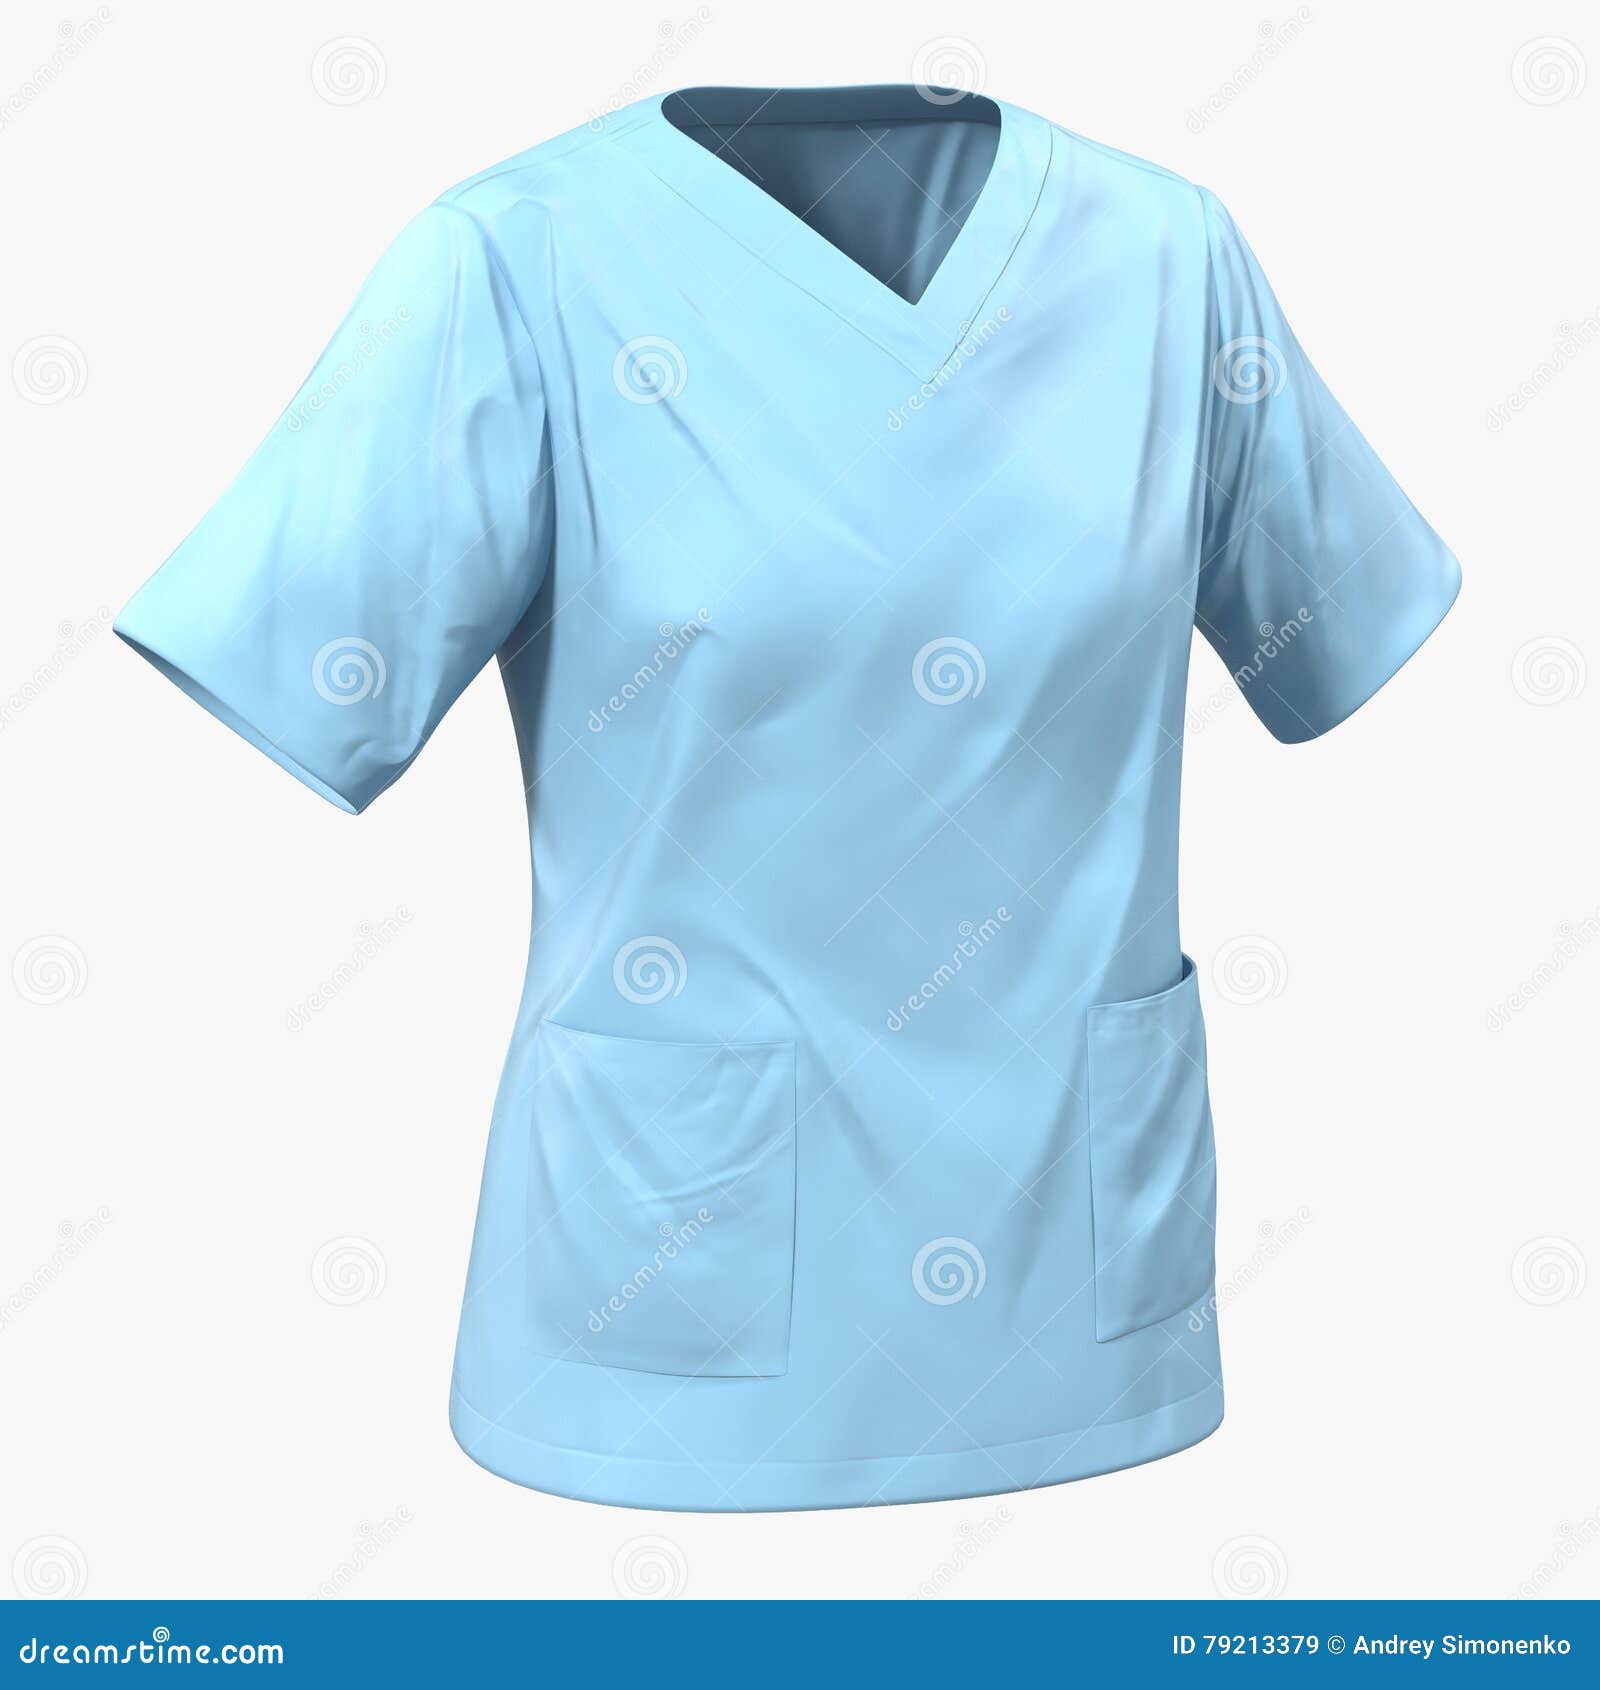 Blue Doctor Uniform T Shirt For Woman Isolated On White No People 3d Illustration Stock Illustration Illustration Of Object Professional